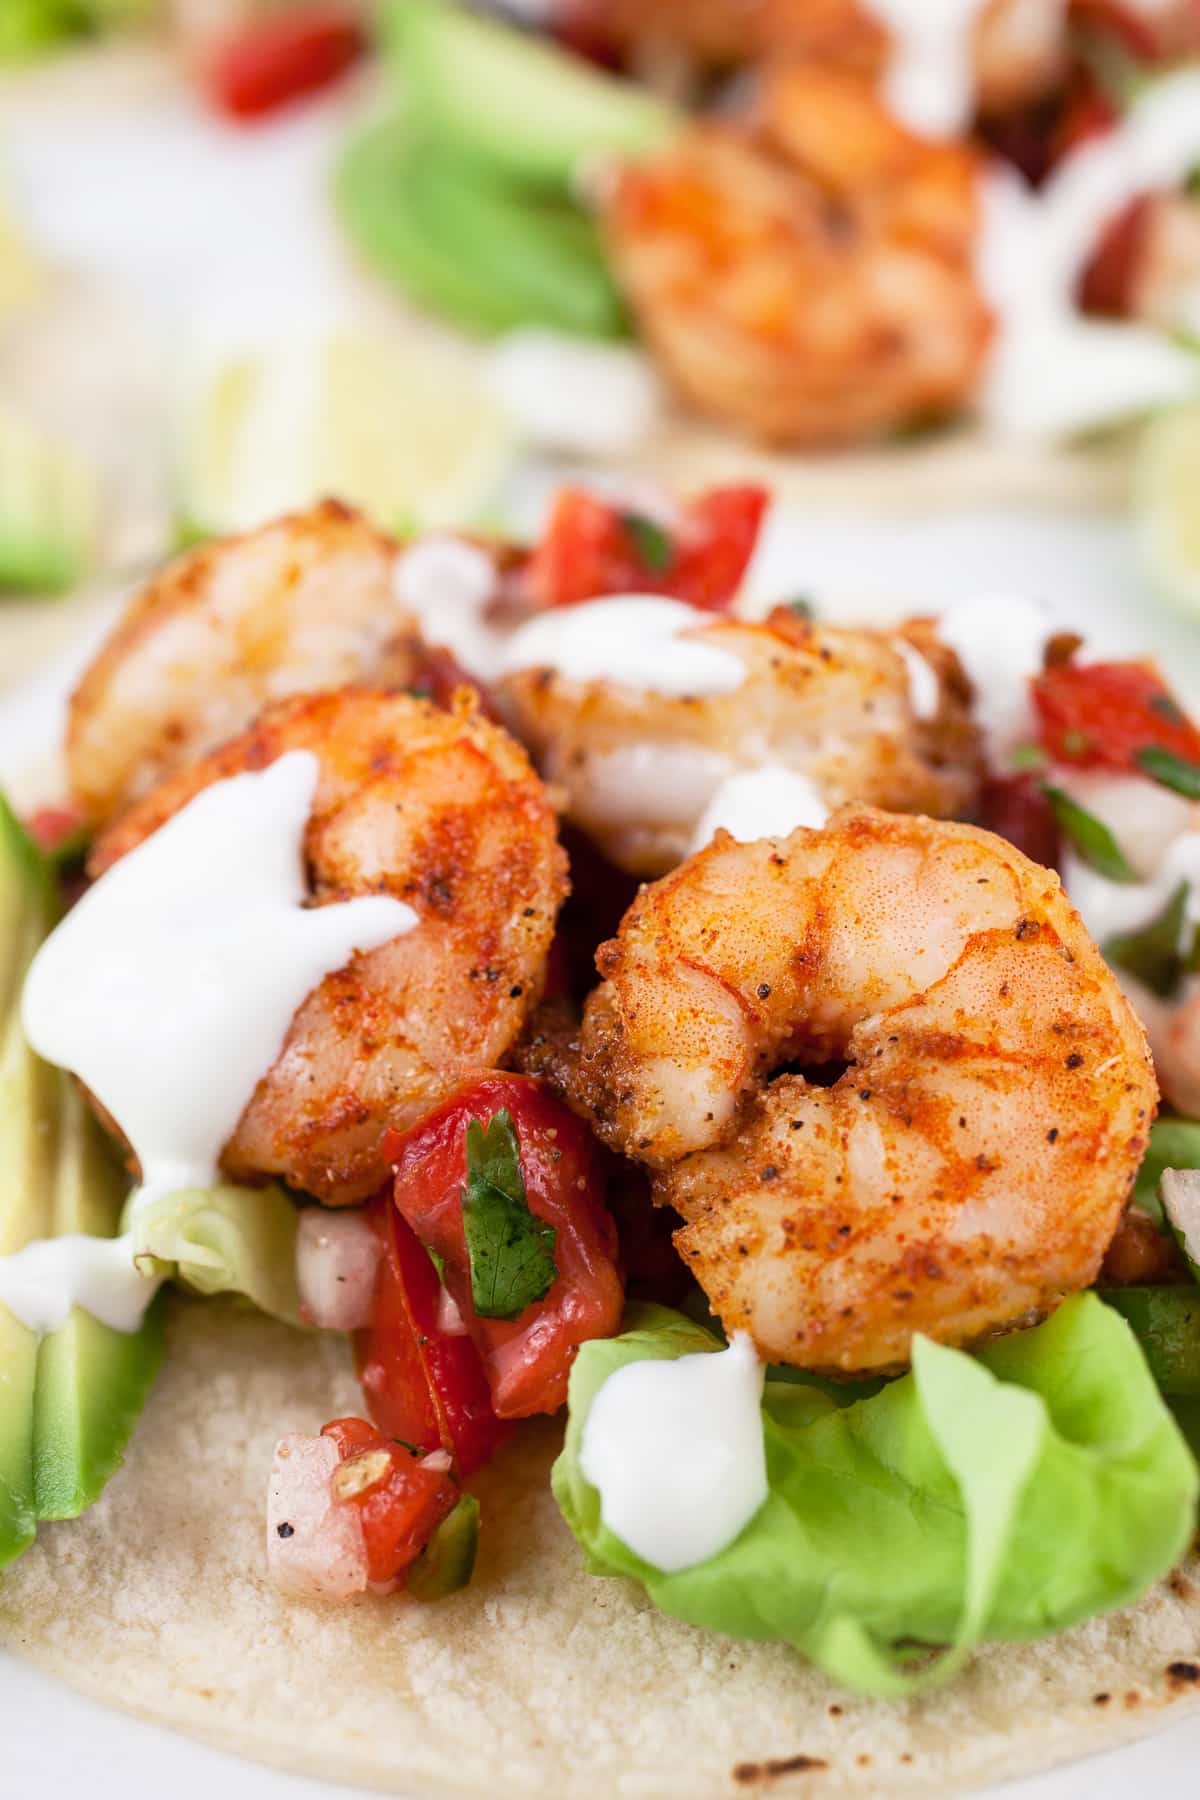 Shrimp tacos with toppings and Mexican crema on corn tortillas.